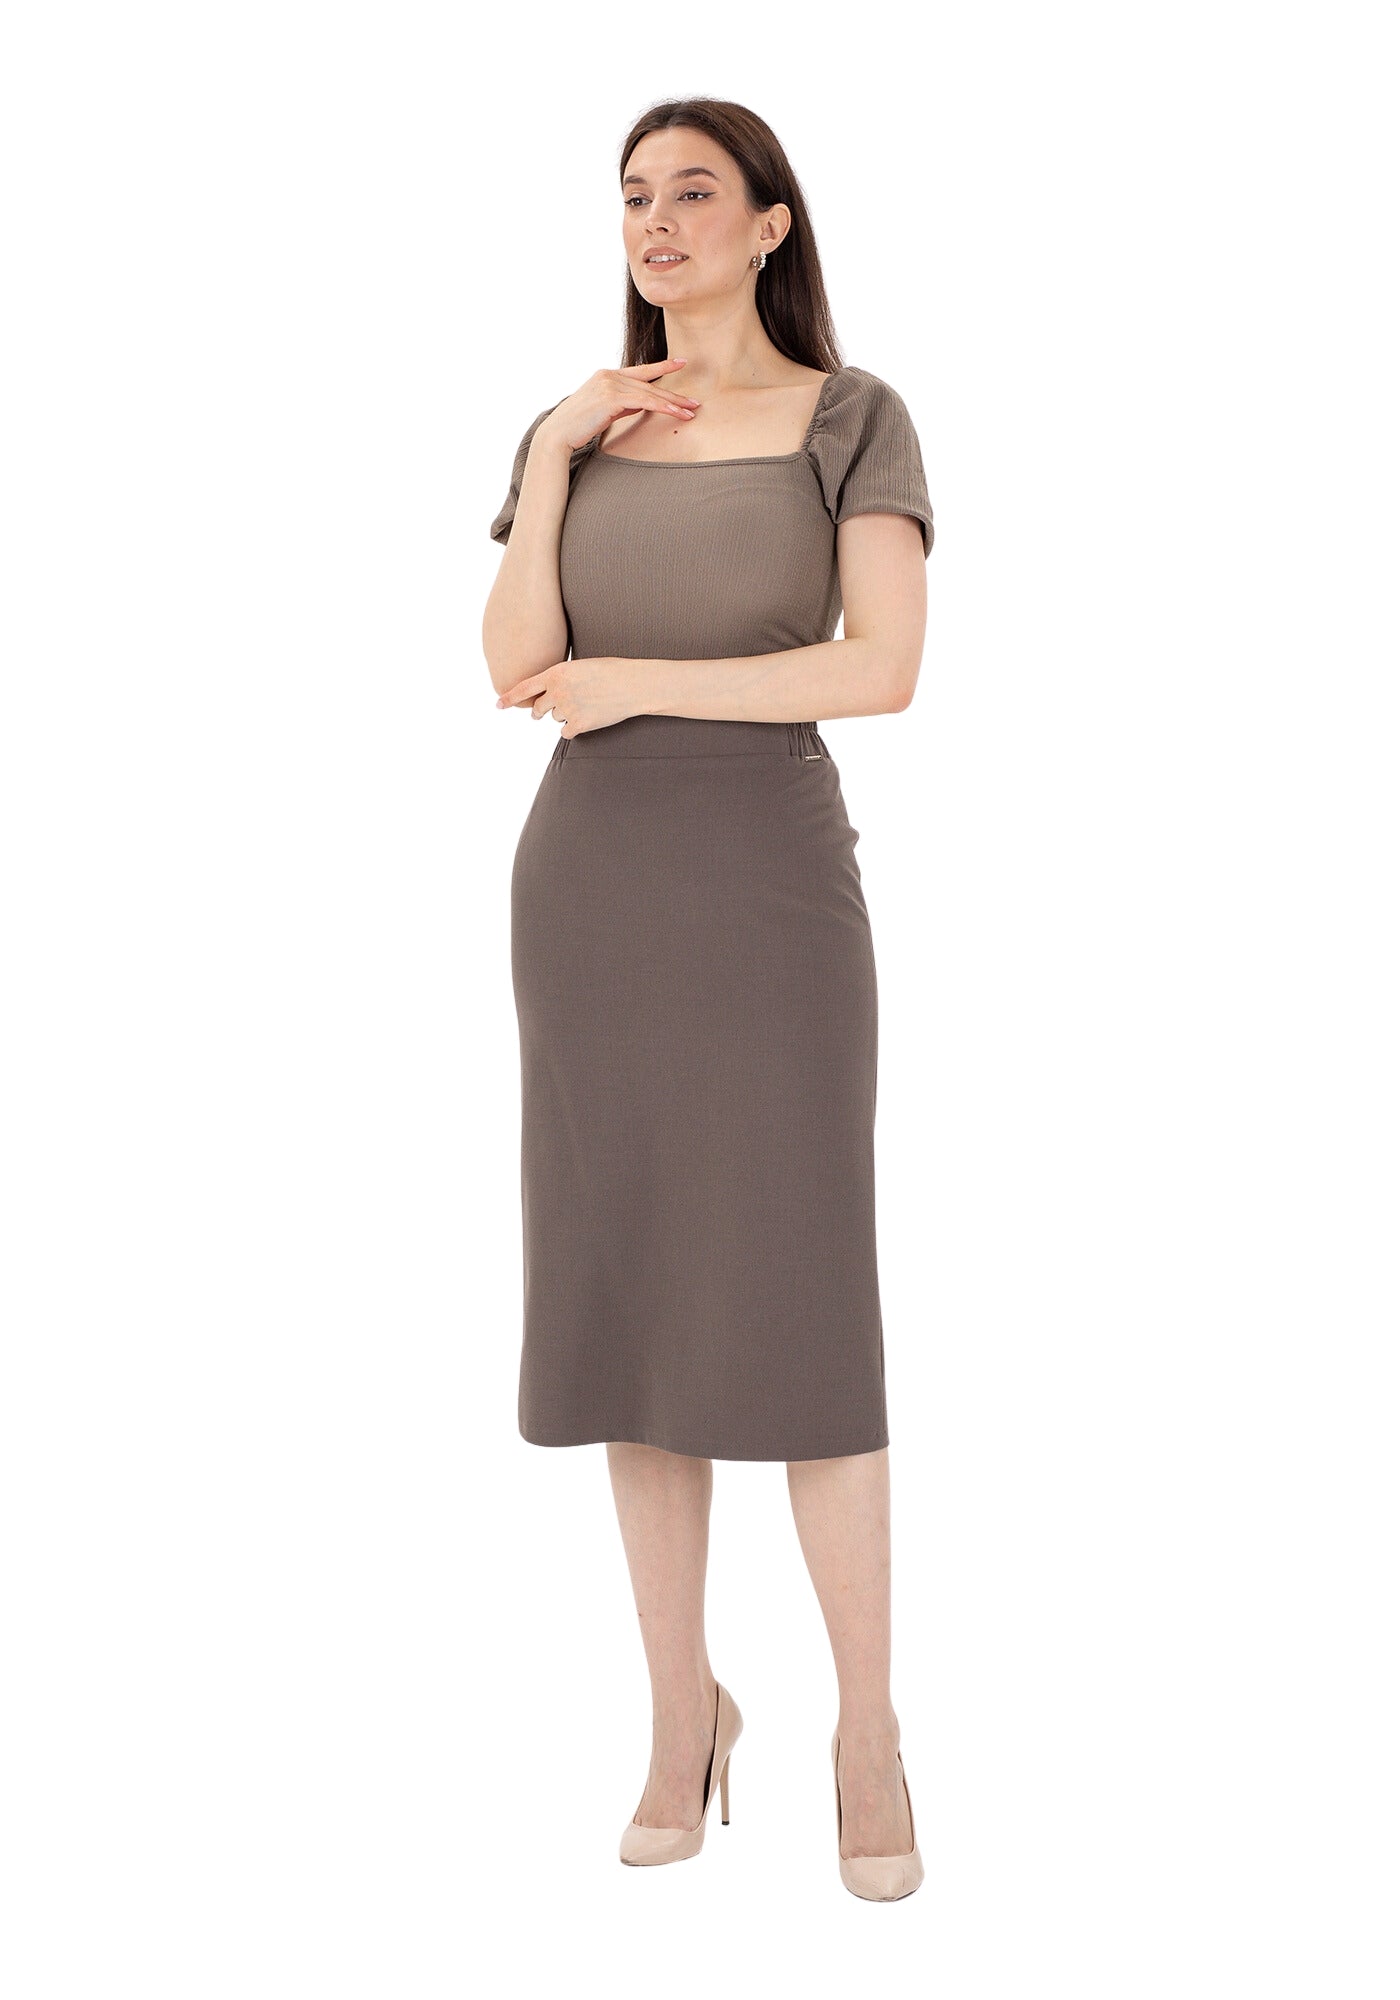 Mink Midi Pencil Skirt with Elastic Waist and Closed Back Vent G-Line